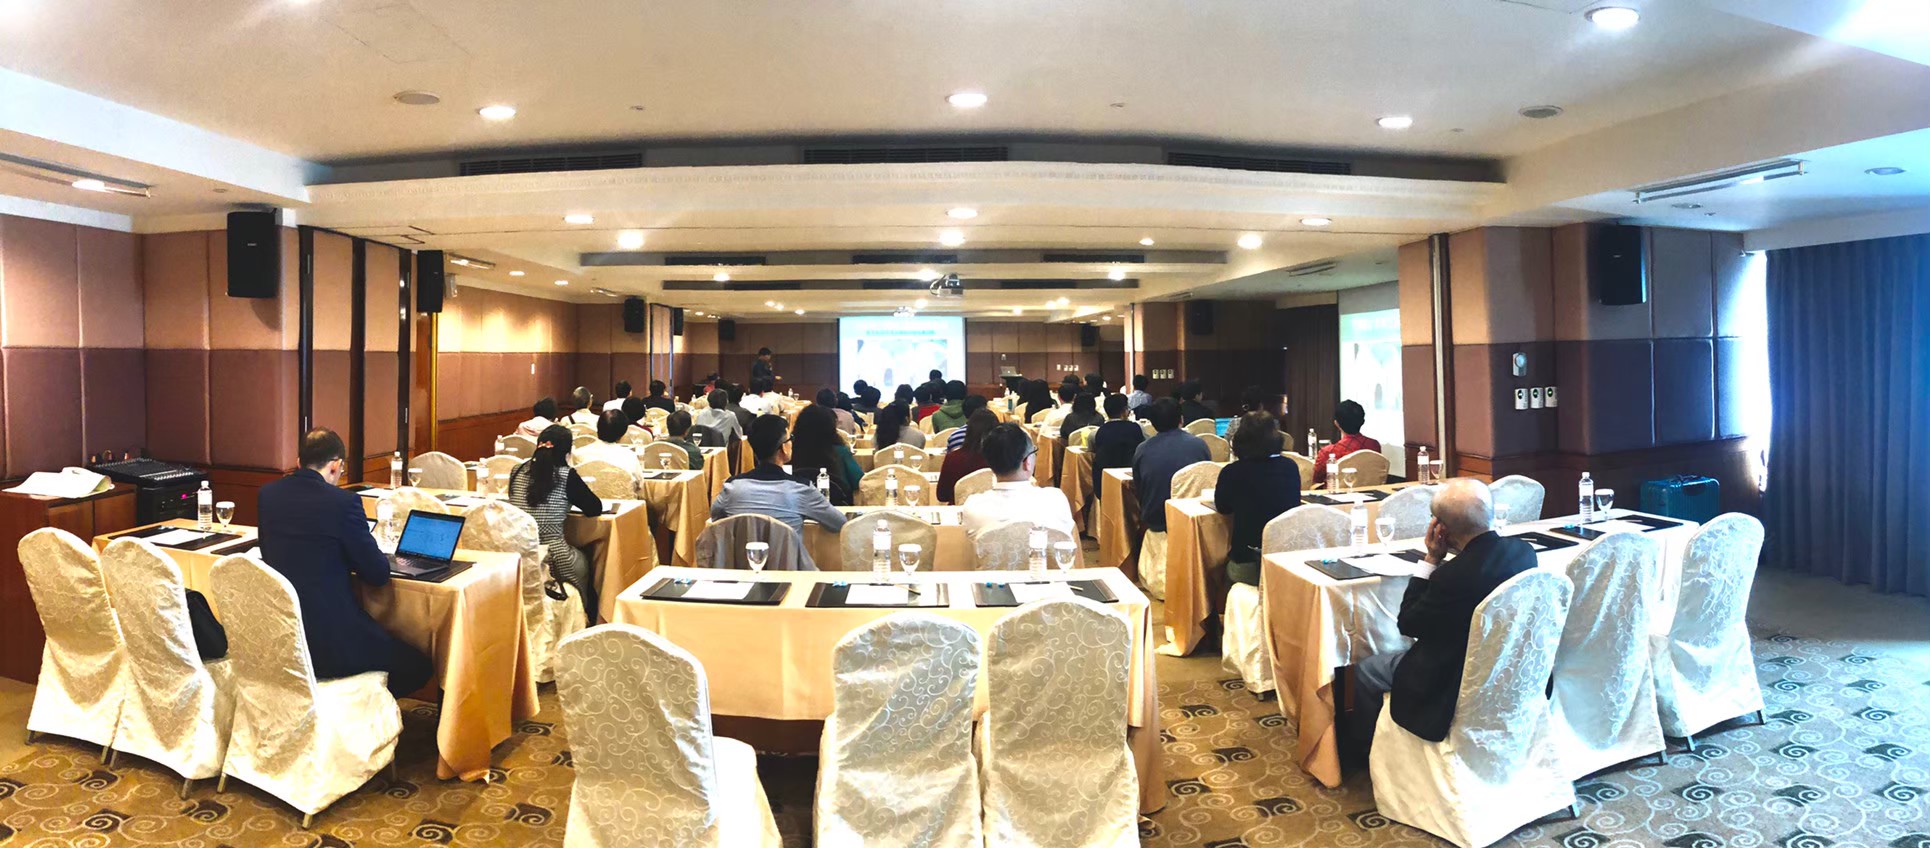 111 Dermatologists were present at our New Era of Atopic Dermatitis Management Symposium in Kaohsiung on Mar 17, 2019